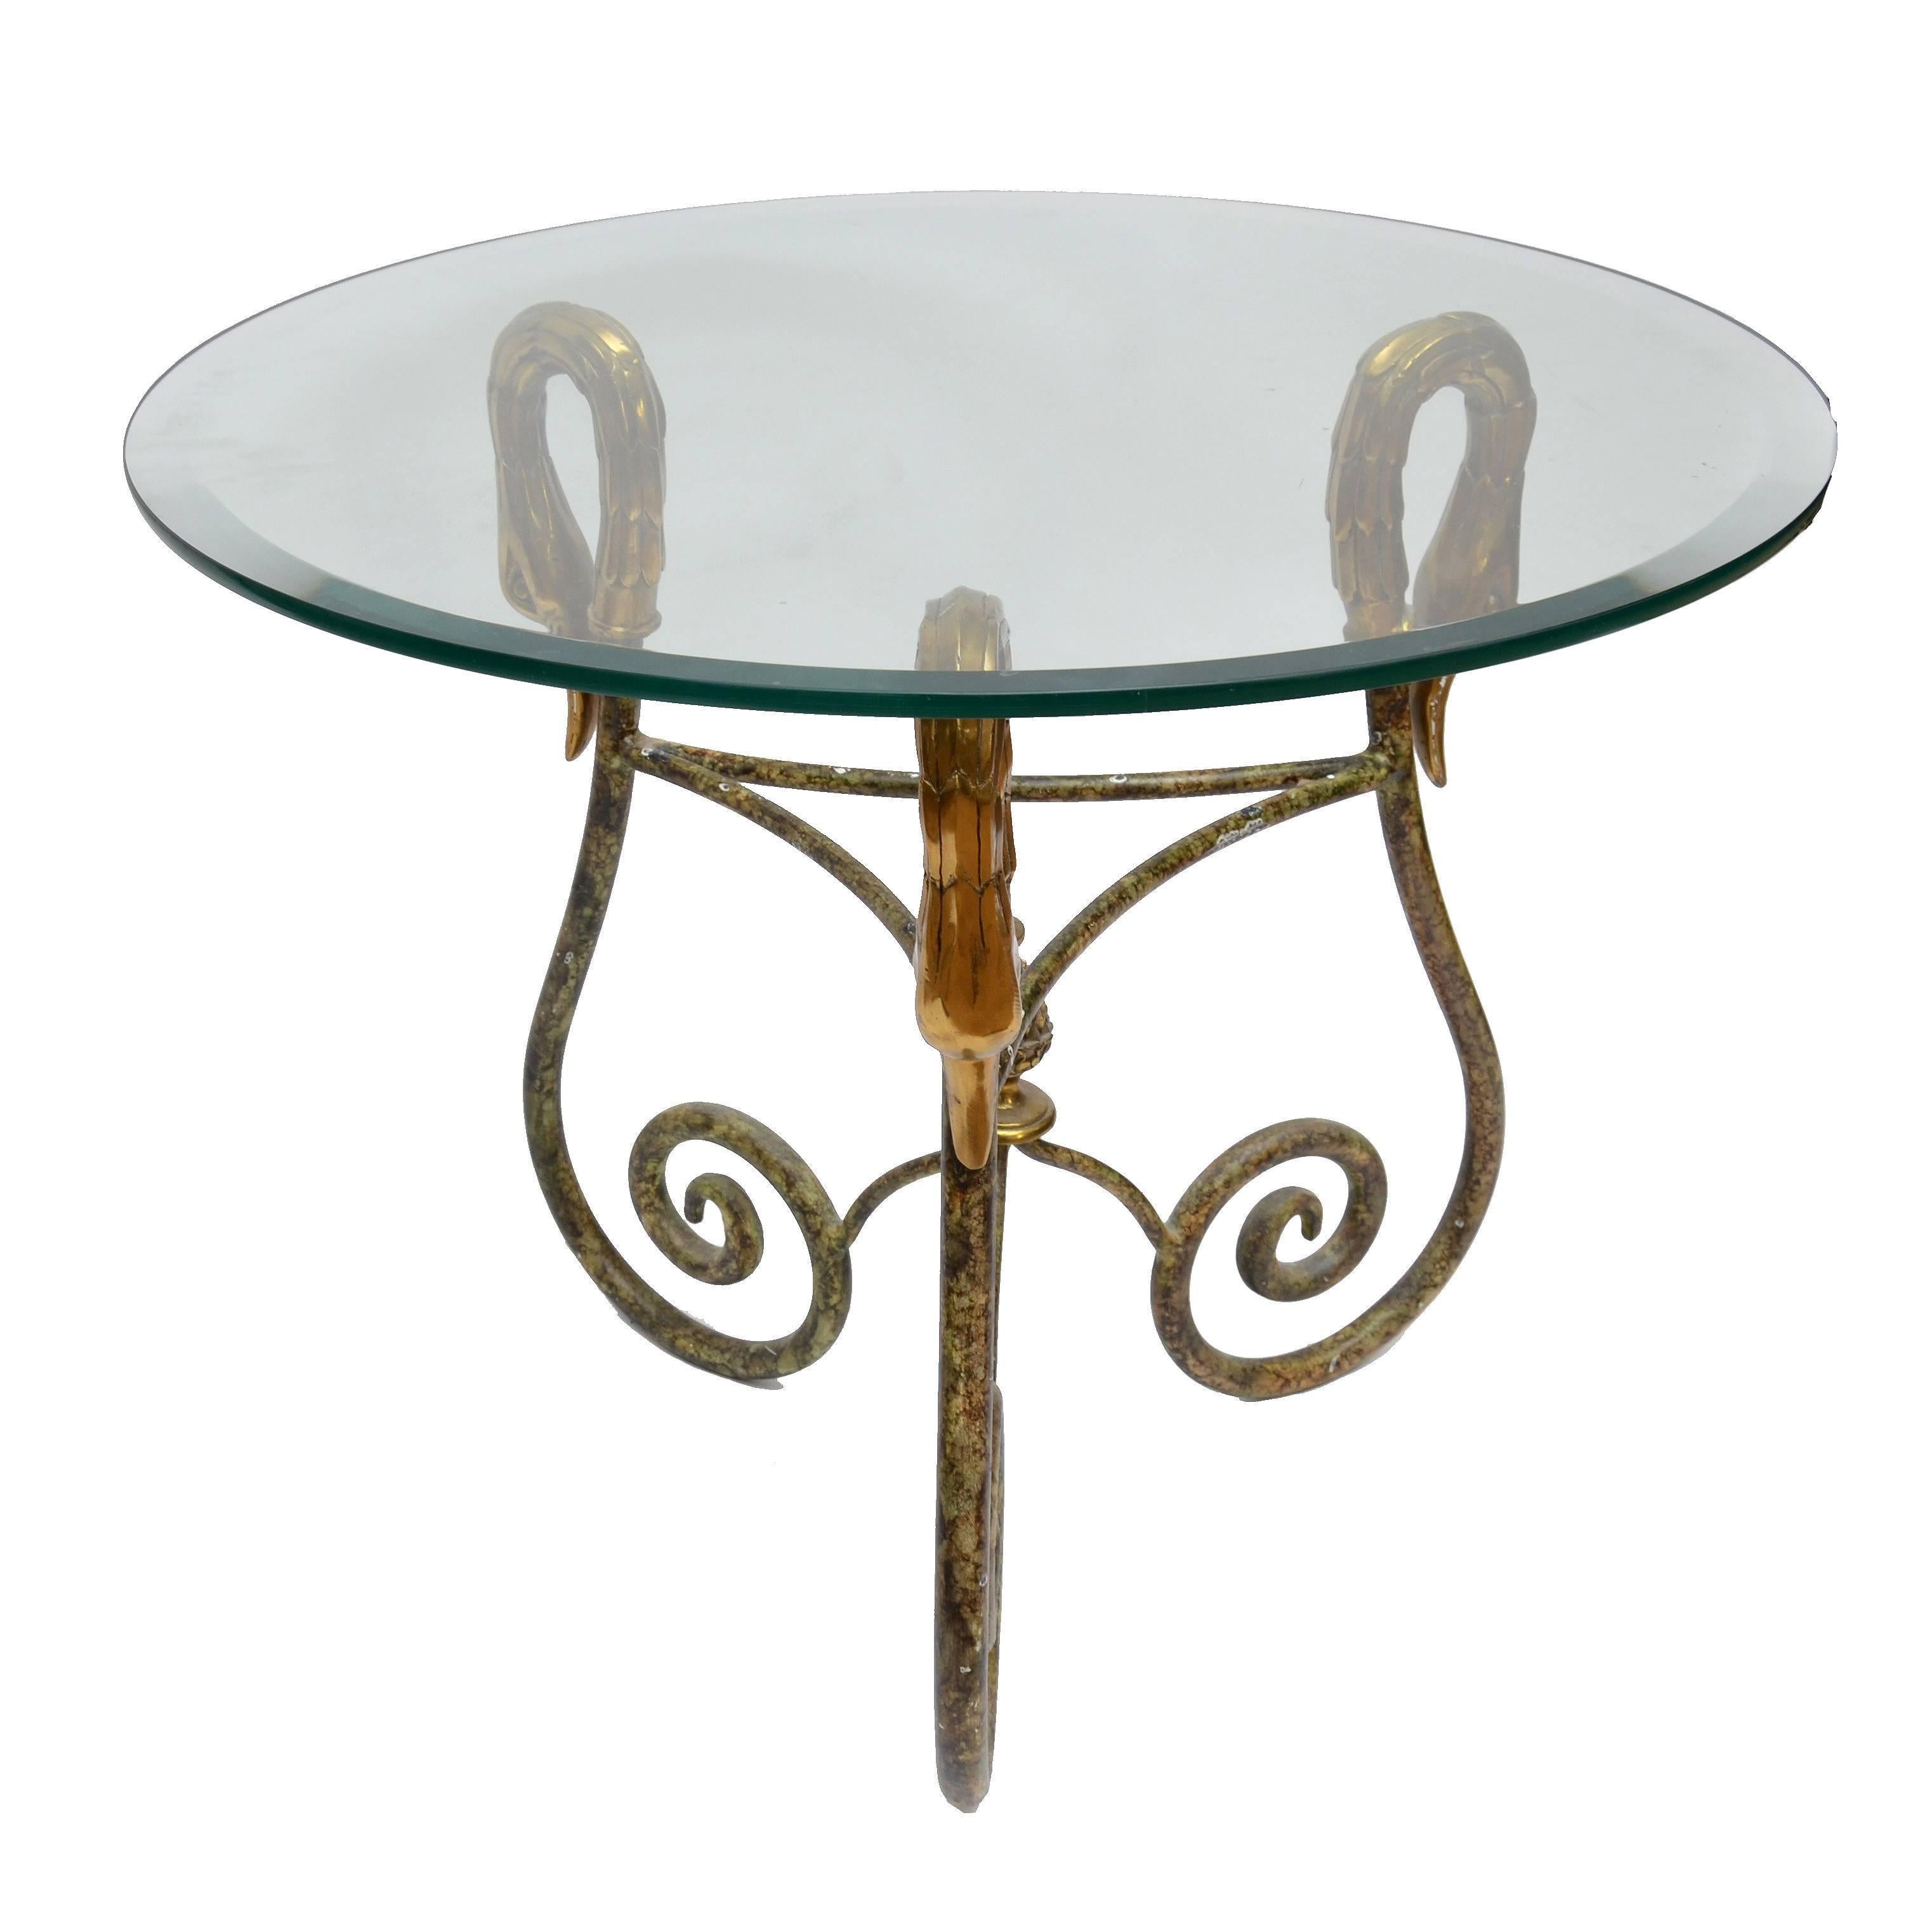 Mid-20th Century Hollywood Regency Wrought Iron Side Table from Italy with Brass Swan Heads 1950 For Sale